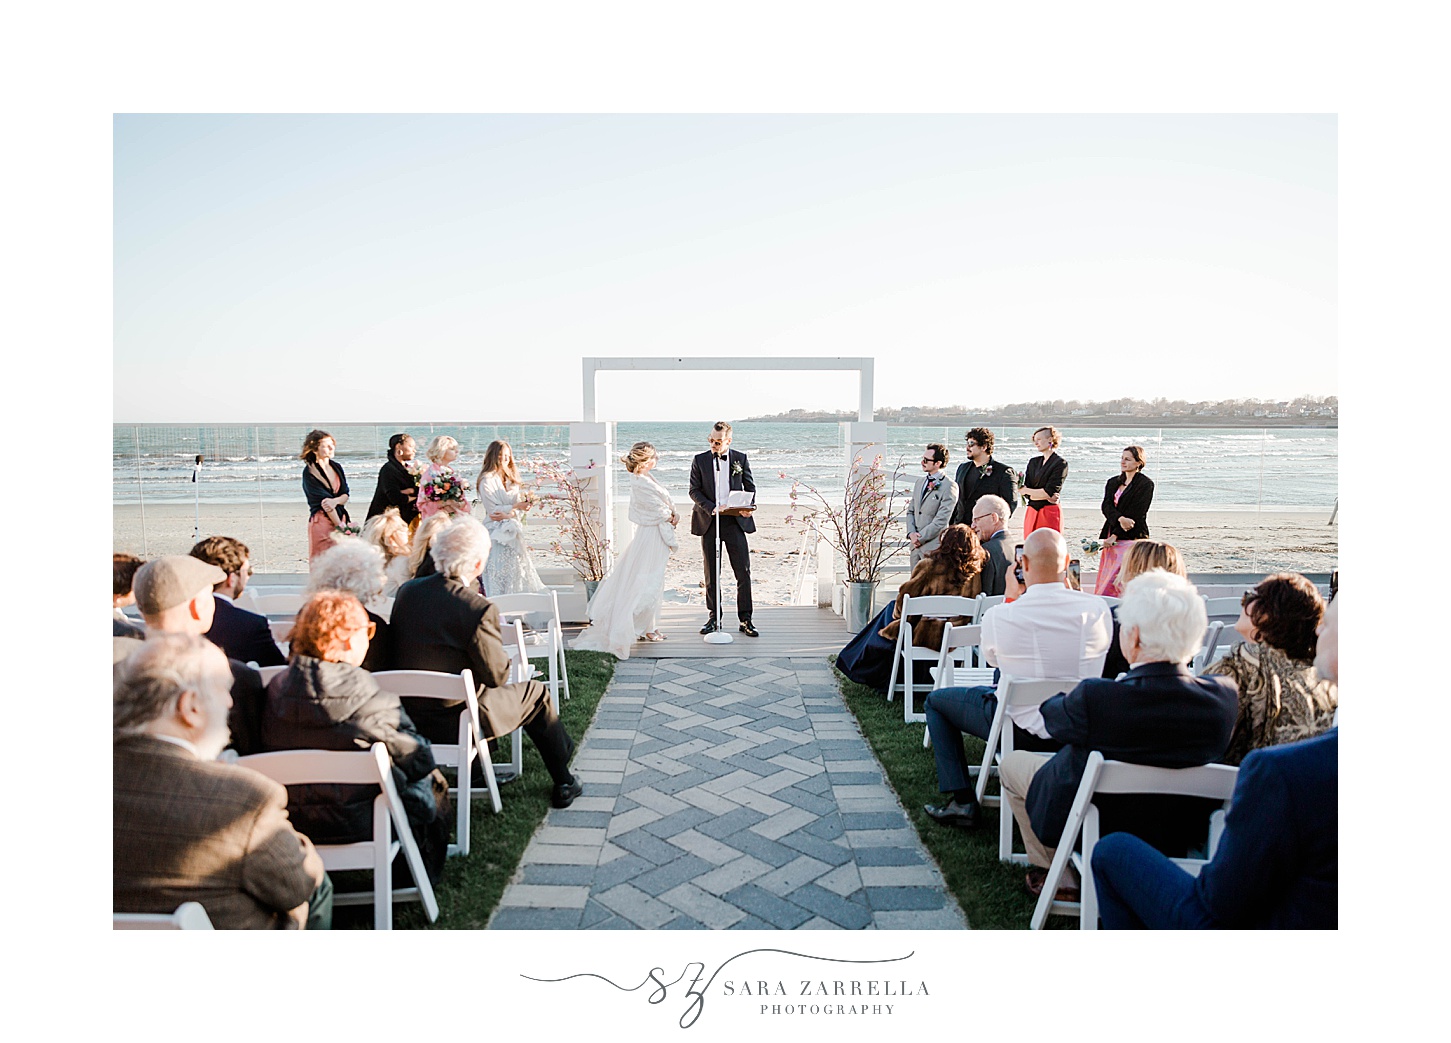 groom reads vows to bride during waterfront wedding ceremony